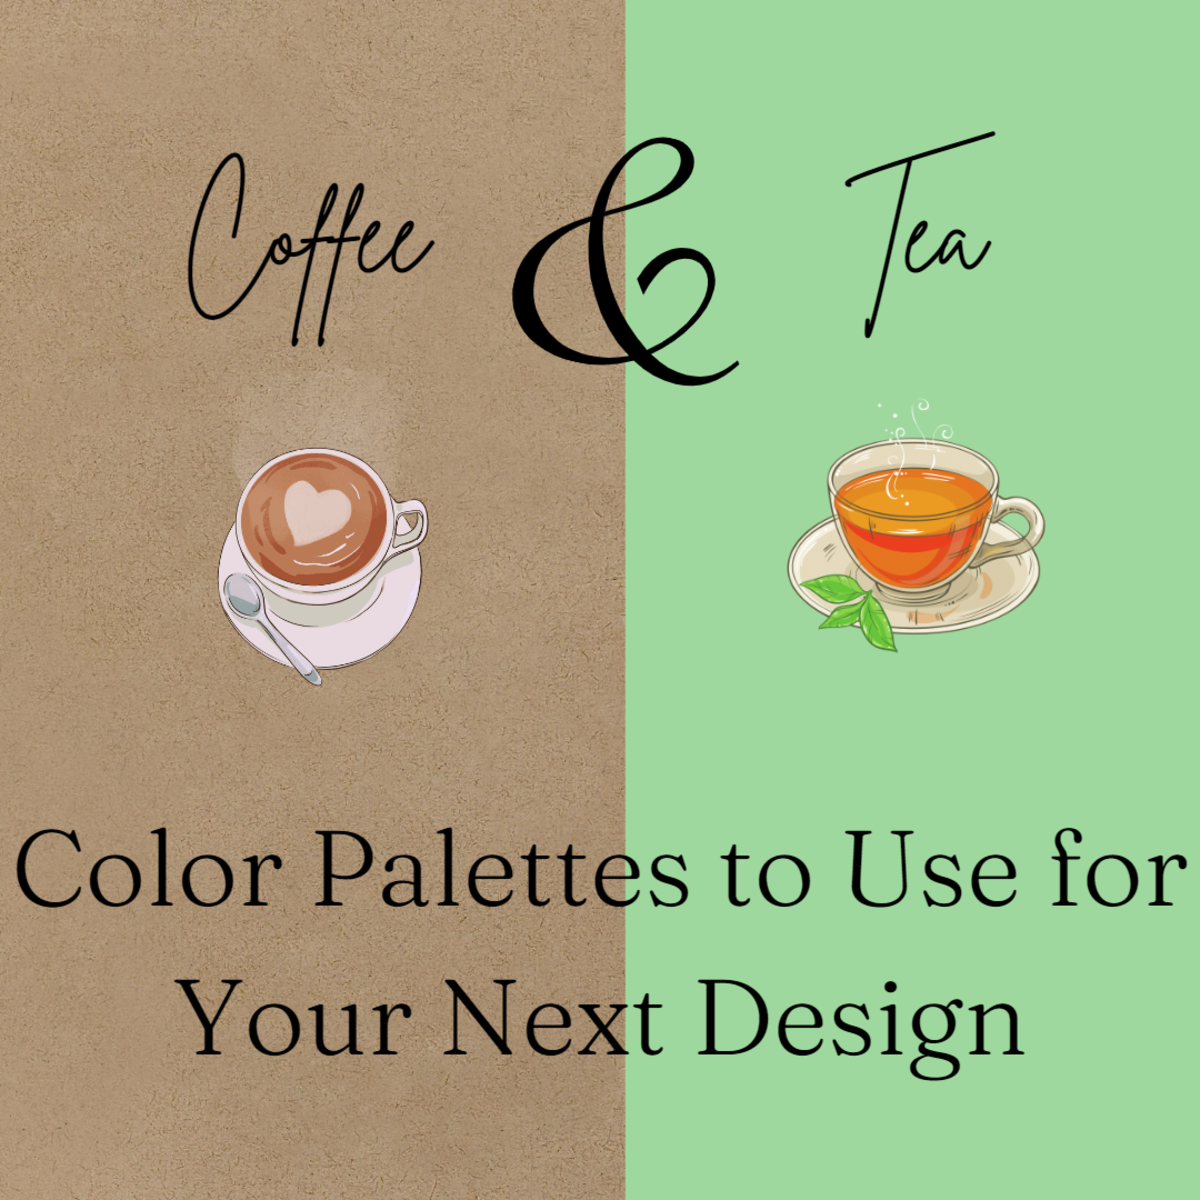 10 Beautiful Coffee/Tea-Inspired Color Palettes for Your Next Design